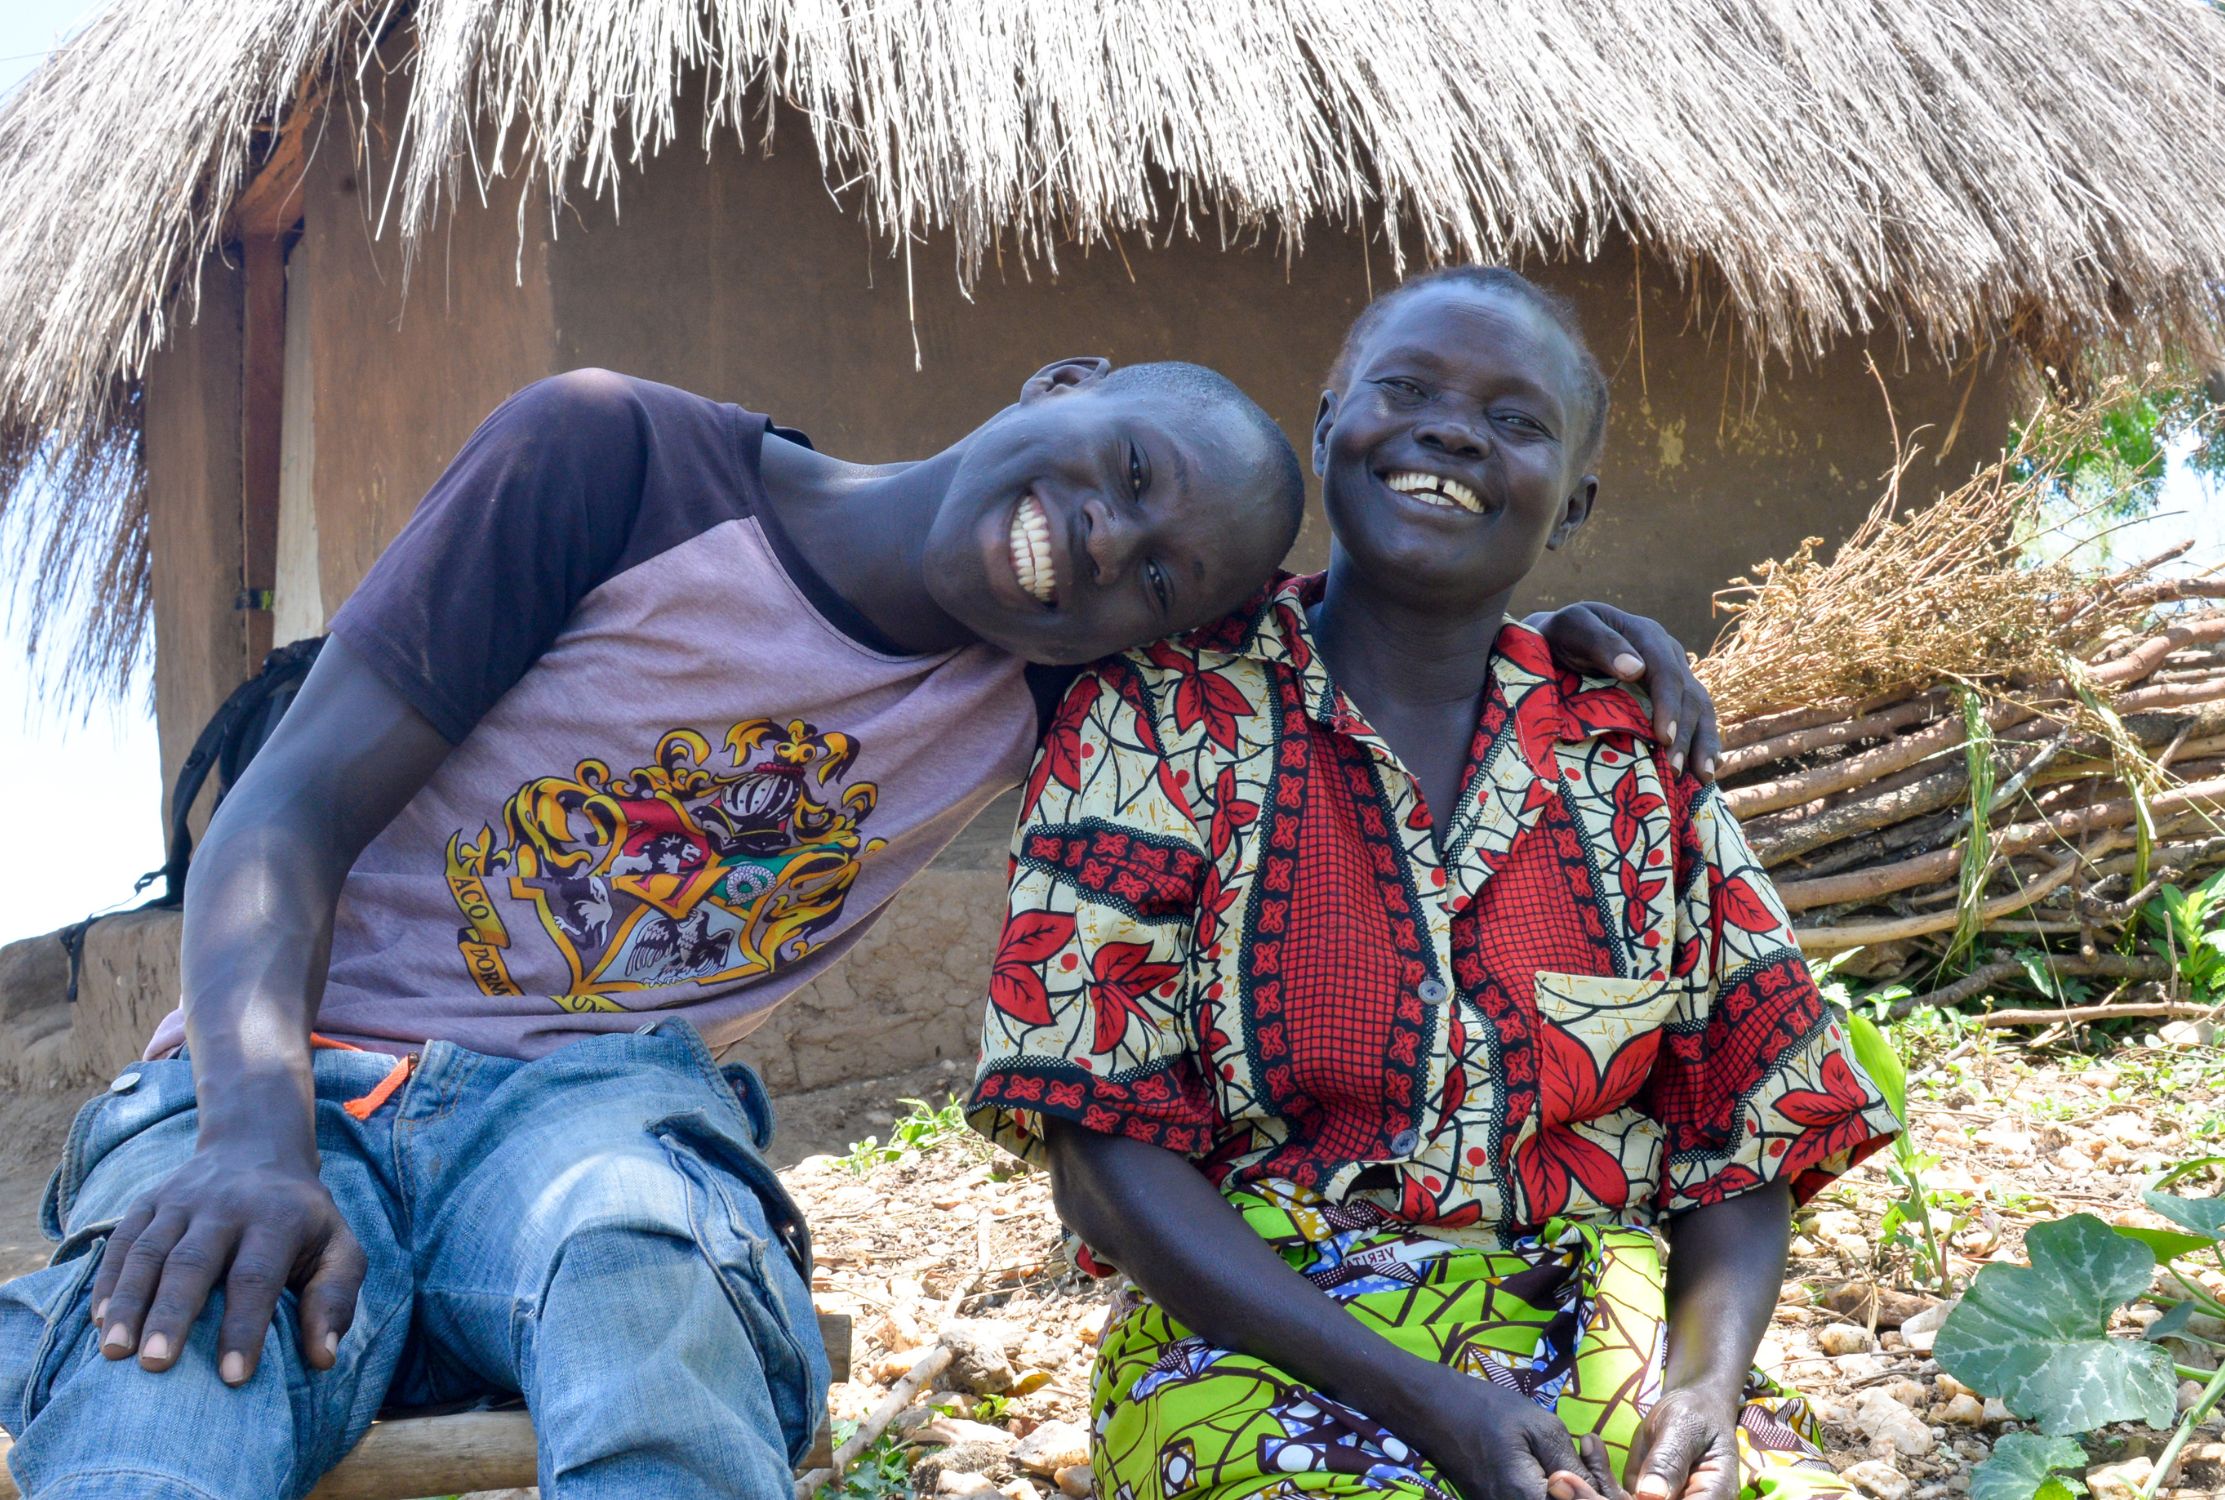 Ugandan refugees, mother and son smiling